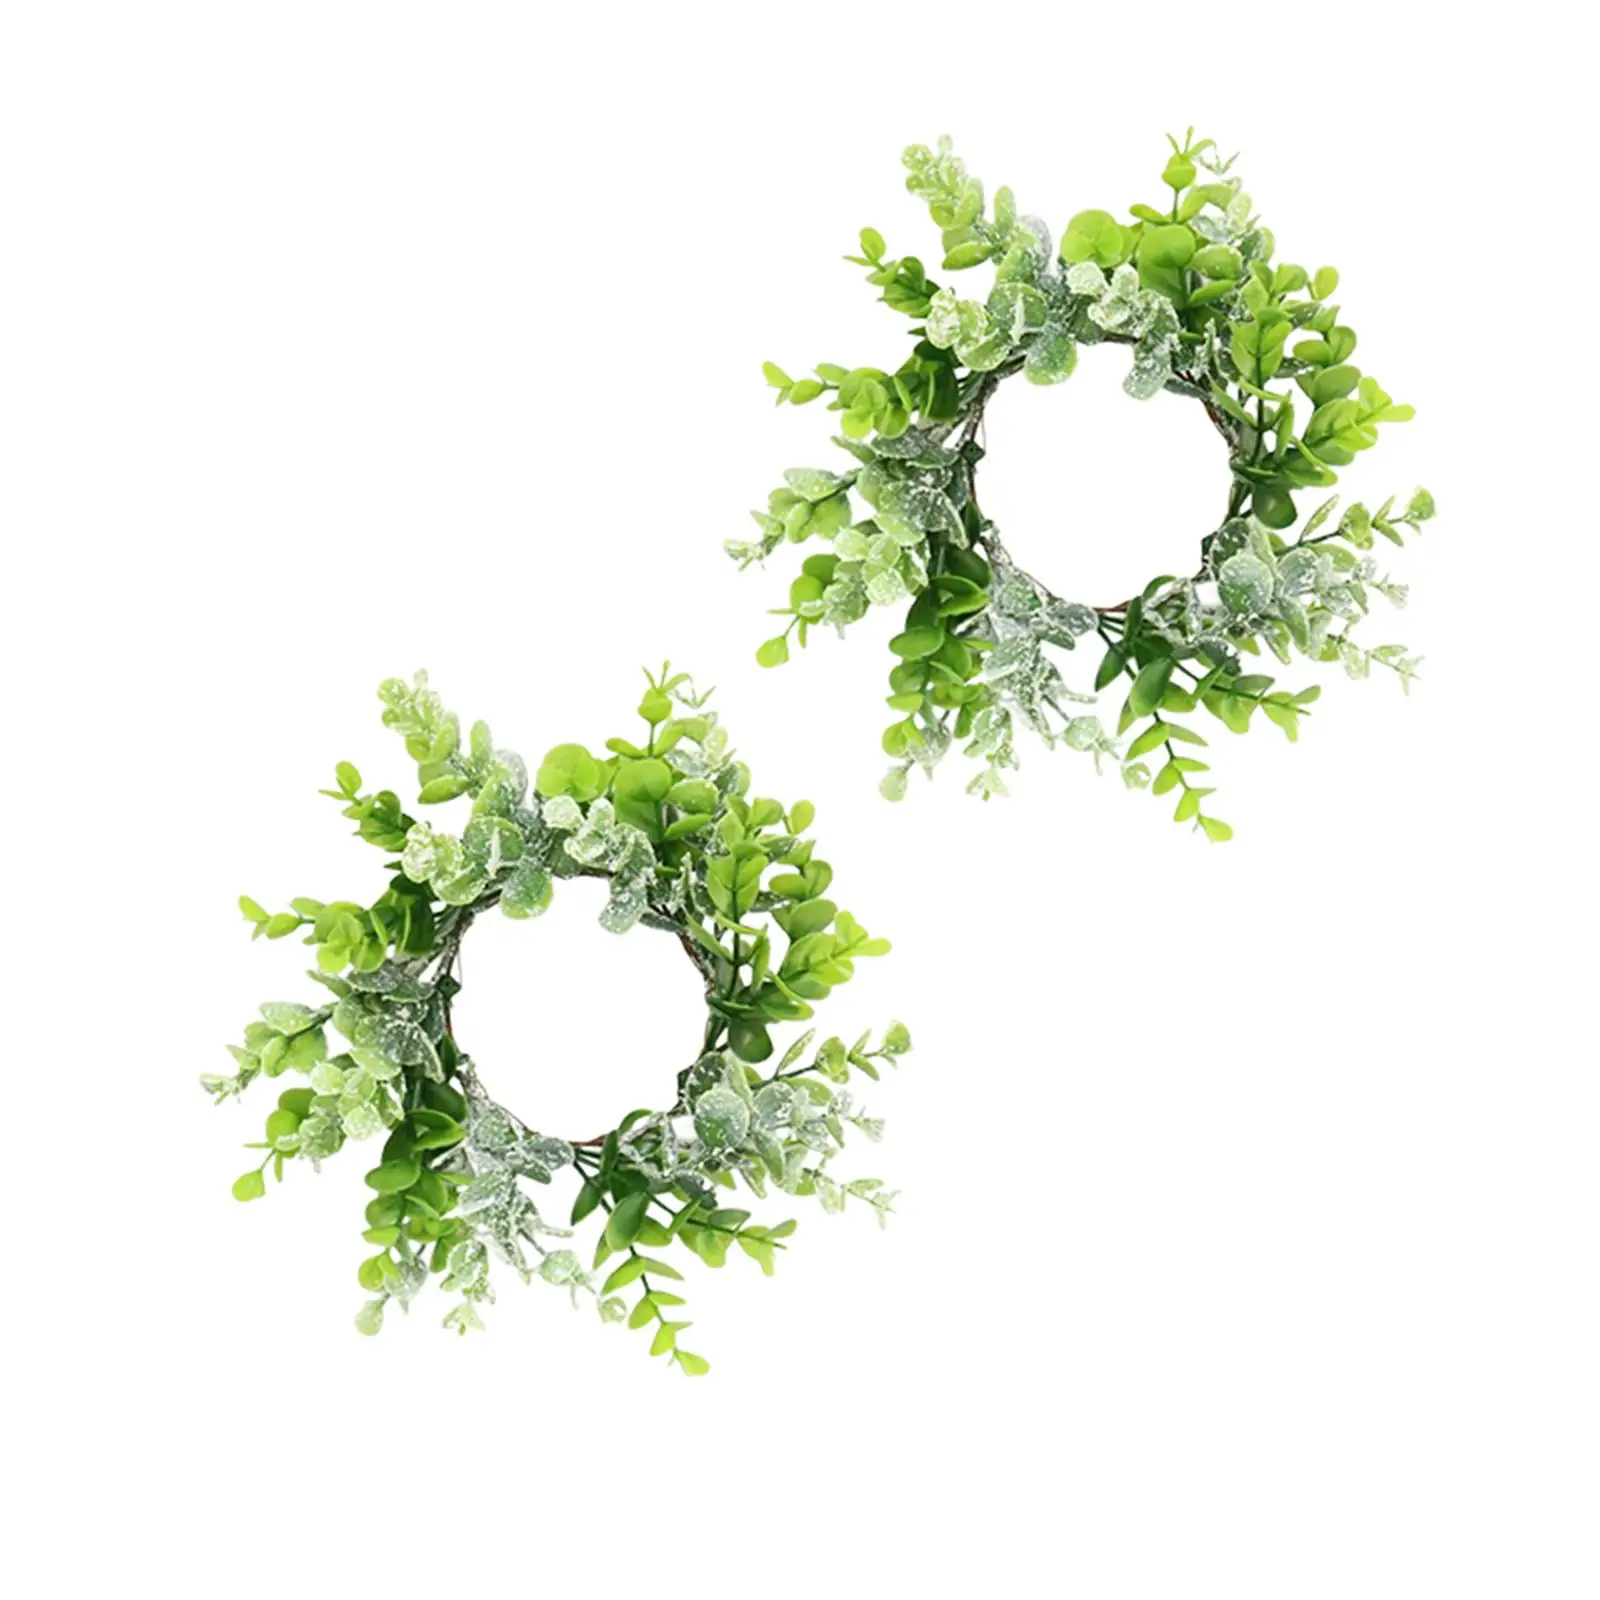 2x Artificial Garland Door Hanging Beautiful Floral Hoop Green Leaves Wreath for Farmhouse Porch Garden Home Window